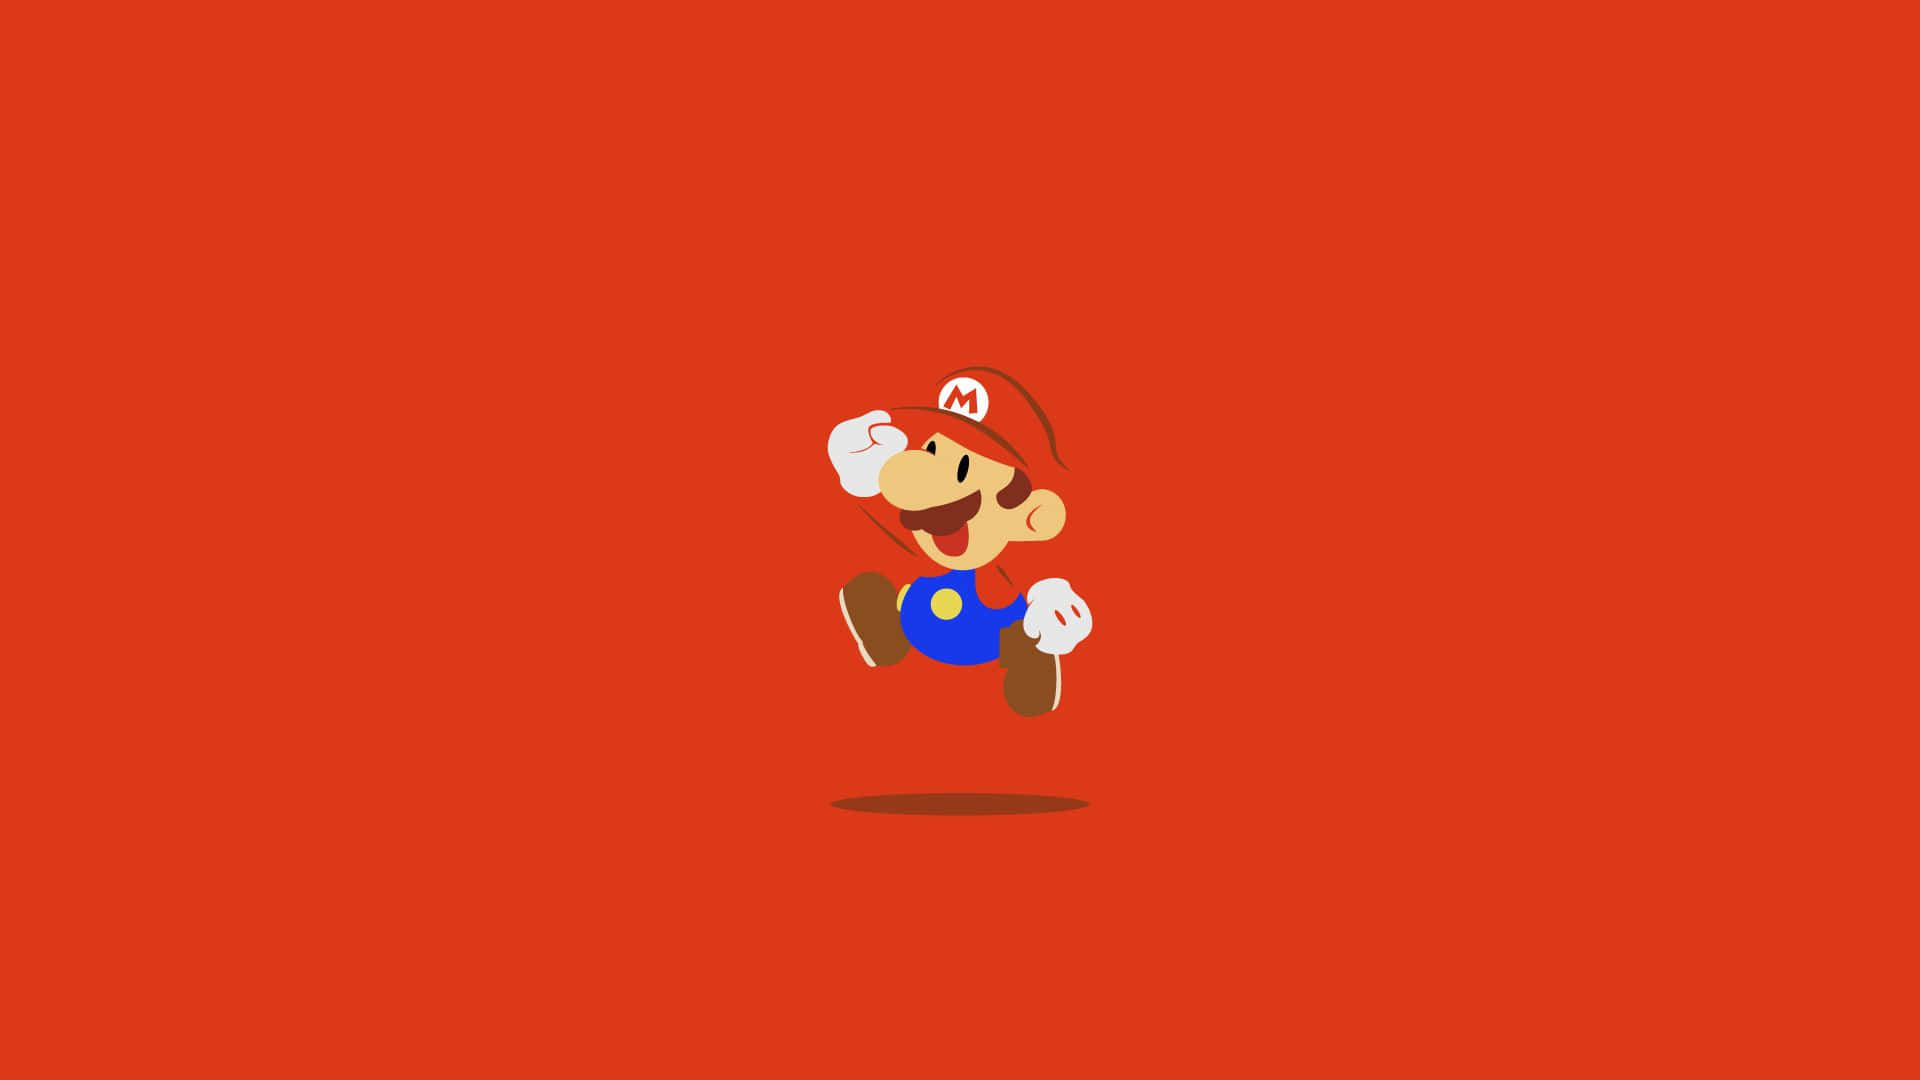 Enjoy The Classic Side-scrolling Game Of Super Mario! Wallpaper